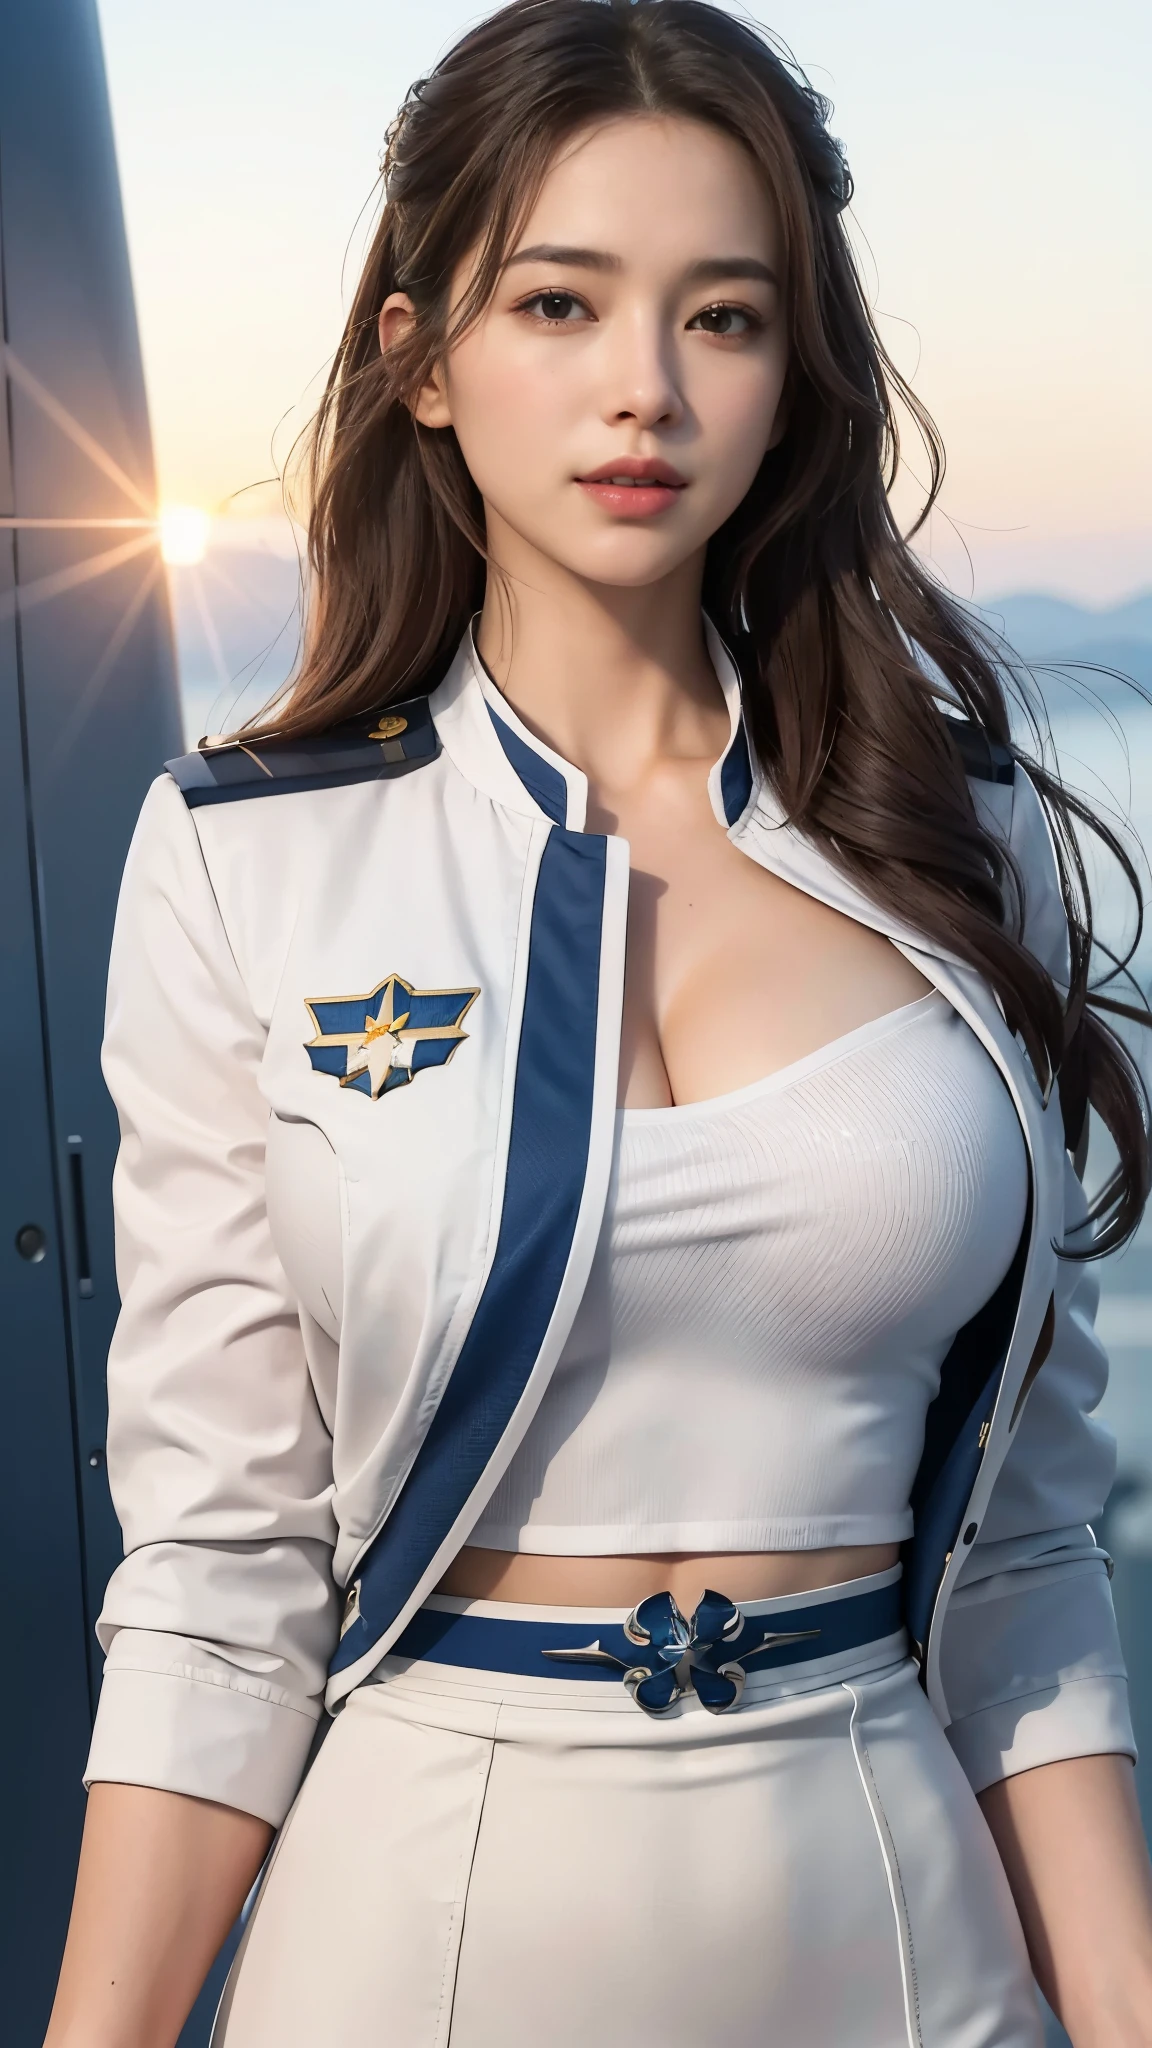 (Best quality, 8k, 32k, Masterpiece, UHD:1.2), (realistic:1.5), (masterpiece, Extremely detailed CG unity 8k wallpaper, best quality, highres:1.2), (ultra detailed, UHD:1.2), Photo of extremely cute and beautiful Japanese woman, (chestnut long wavy hair:1.2), adult, (detailed beautiful girl:1.4), best quality, woman, adult, (detailed US air-force pilot uniform:1.5), (white pilot captain jacket:1.3), (white high-waist pencil skirt:1.3), detailed clothes, (Beautiful sunset US air force base runway view background:1.3), embarrassed laughing:1, light smile, looking at viewer, facing the viewer, ((perfect female body)), (narrow waist:1.2), (upper body image:1.3), slender, abs, (large breasted:1.25), ((frame the head)), wind, dynamic pose, cinematic light, back light, perfect anatomy, perfect proportion, detailed human body, bokeh, depth of field,Show breasts，,Show breasts，,Show breasts，,Show breasts，,Show breasts，,Show breasts，,Show breasts，,Show breasts，,Show breasts，,Show breasts，,Show breasts，,Show breasts，,Show breasts，,Show breasts，,Show breasts，,Show breasts，,Show breasts，,Show breasts，,Show breasts，,Show breasts，,Show breasts，,Show breasts，,Show breasts，,Show breasts，,Show breasts，,Show breasts，,Show breasts，,Show breasts，,Show breasts，,Show breasts，,Show breasts，,Show breasts，,Show breasts，,Show breasts，,Show breasts，,Show breasts，,Show breasts，,Show breasts，,Show breasts，,Show breasts，,Show breasts，,Show breasts，,Show breasts，,Show breasts，,Show breasts，,Show breasts，,Show breasts，,Show breasts，,Show breasts，,Show breasts，,Show breasts，exposing her chest、exposing her chest，exposing her chest、exposing her chest，exposing her chest、exposing her chest，exposing her chest、exposing her chest，exposing her chest、exposing her chest，exposing her chest、exposing her chest，exposing her chest、exposing her chest，Expose nipples、exposing her chest，exposing her chest、exposing her chest，Expose nipples、exposing her chest，exposing her chest、exposing her chest，Expose nipples、exposing her chest，exposing her chest、exposing her chest，Expose nipples、exposing her chest，exposing her chest、exposing her chest，Expose nipples